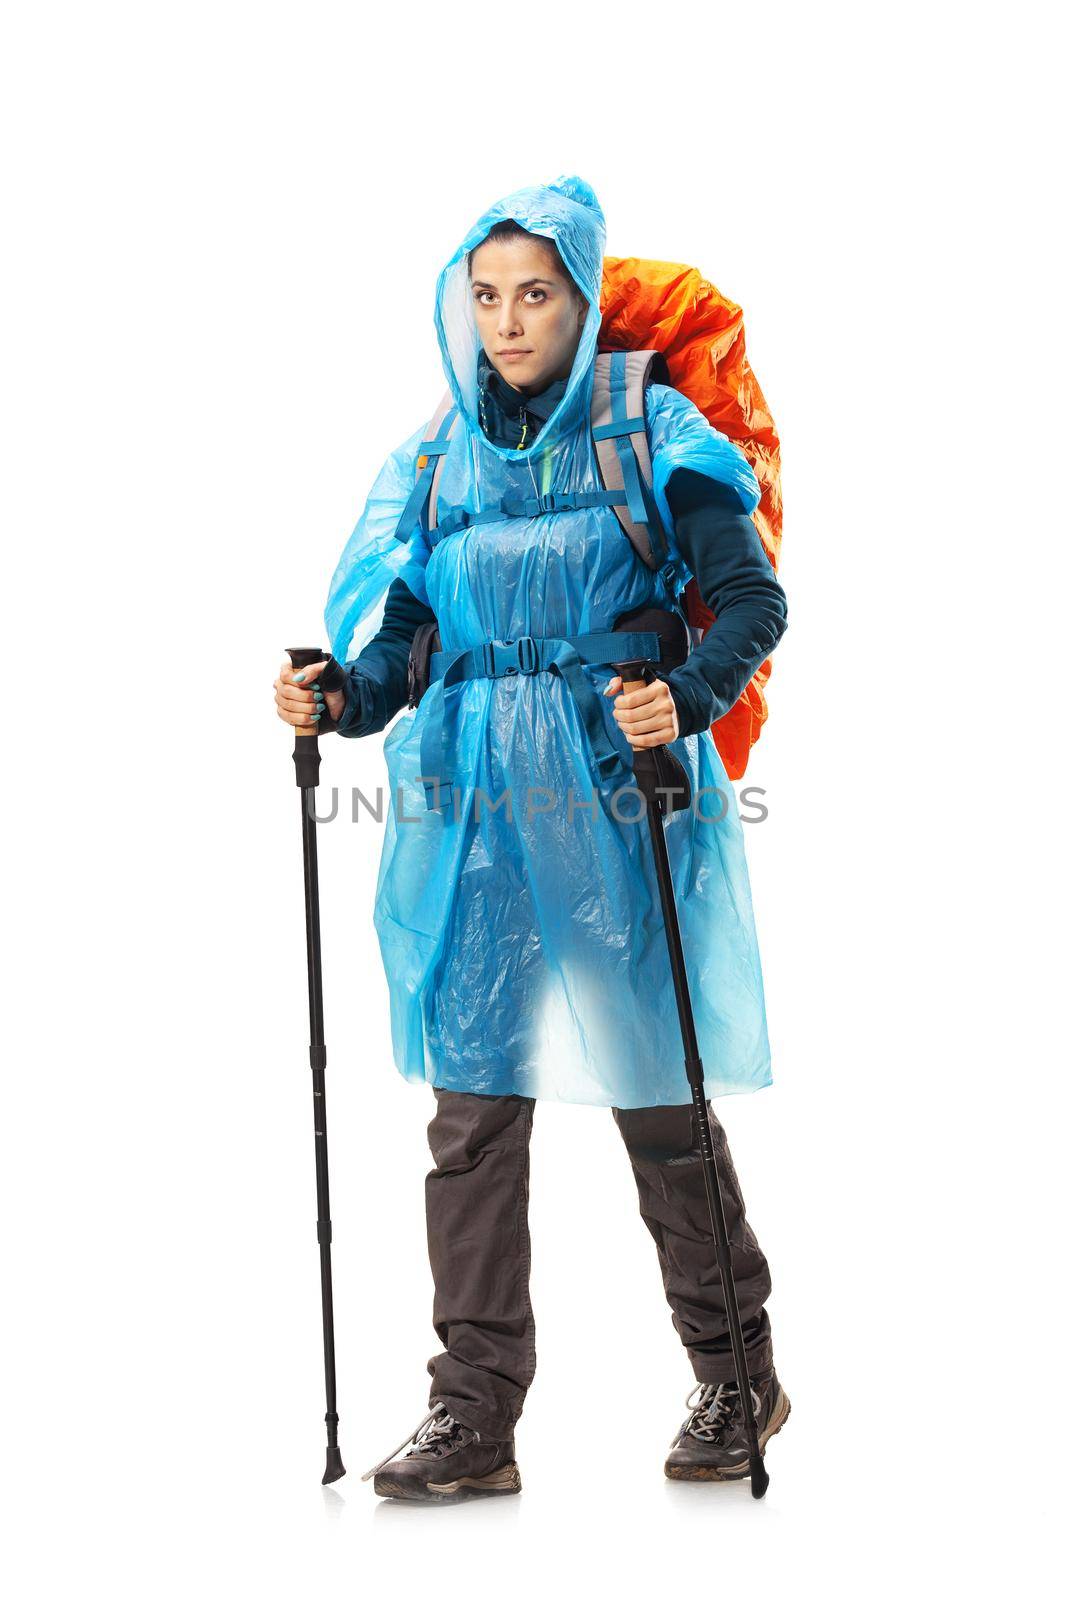 girl with hiking equipment and large backpack, wearing blue raincoat, posing in studio isolated on white by kokimk